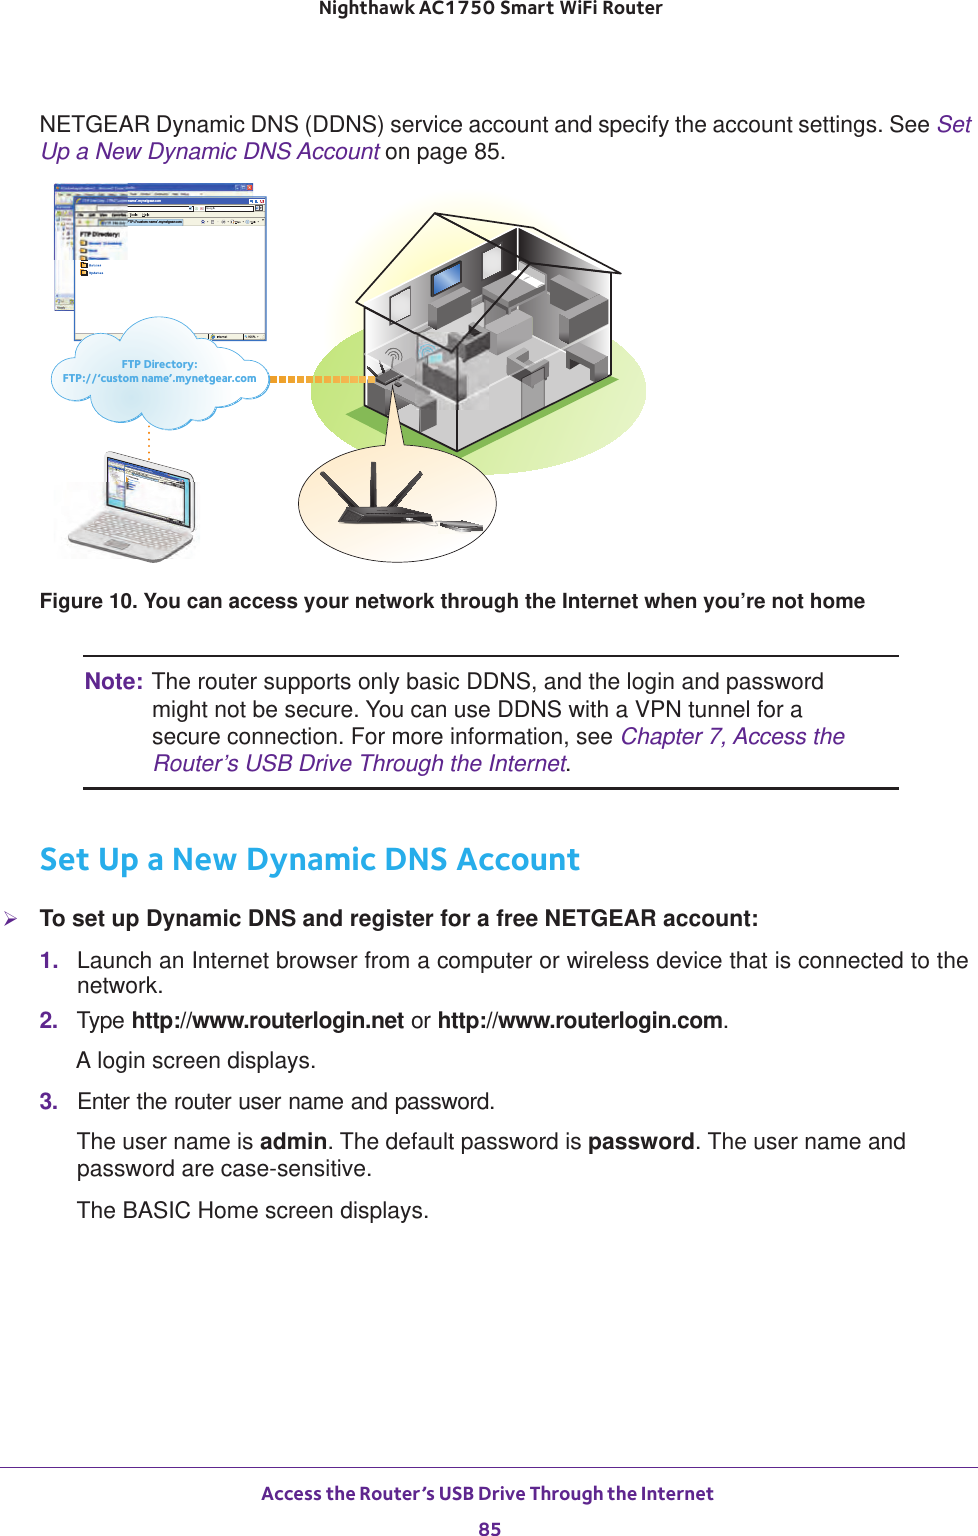 Access the Router’s USB Drive Through the Internet 85 Nighthawk AC1750 Smart WiFi RouterNETGEAR Dynamic DNS (DDNS) service account and specify the account settings. See Set Up a New Dynamic DNS Account on page  85. FTP Directory: FTP://‘custom name’.mynetgear.comFTP Directory: FTP://‘custom name’.mynetgear.comFTP Directory: FTP://‘custom name’.mynetgear.comFTP Directory: FTP://‘custom name’.mynetgear.comFTP Directory:FTP://‘custom name’.mynetgear.comFigure 10. You can access your network through the Internet when you’re not homeNote: The router supports only basic DDNS, and the login and password might not be secure. You can use DDNS with a VPN tunnel for a secure connection. For more information, see Chapter 7, Access the Router’s USB Drive Through the Internet.Set Up a New Dynamic DNS AccountTo set up Dynamic DNS and register for a free NETGEAR account:1.  Launch an Internet browser from a computer or wireless device that is connected to the network.2.  Type http://www.routerlogin.net or http://www.routerlogin.com.A login screen displays.3.  Enter the router user name and password.The user name is admin. The default password is password. The user name and password are case-sensitive.The BASIC Home screen displays.